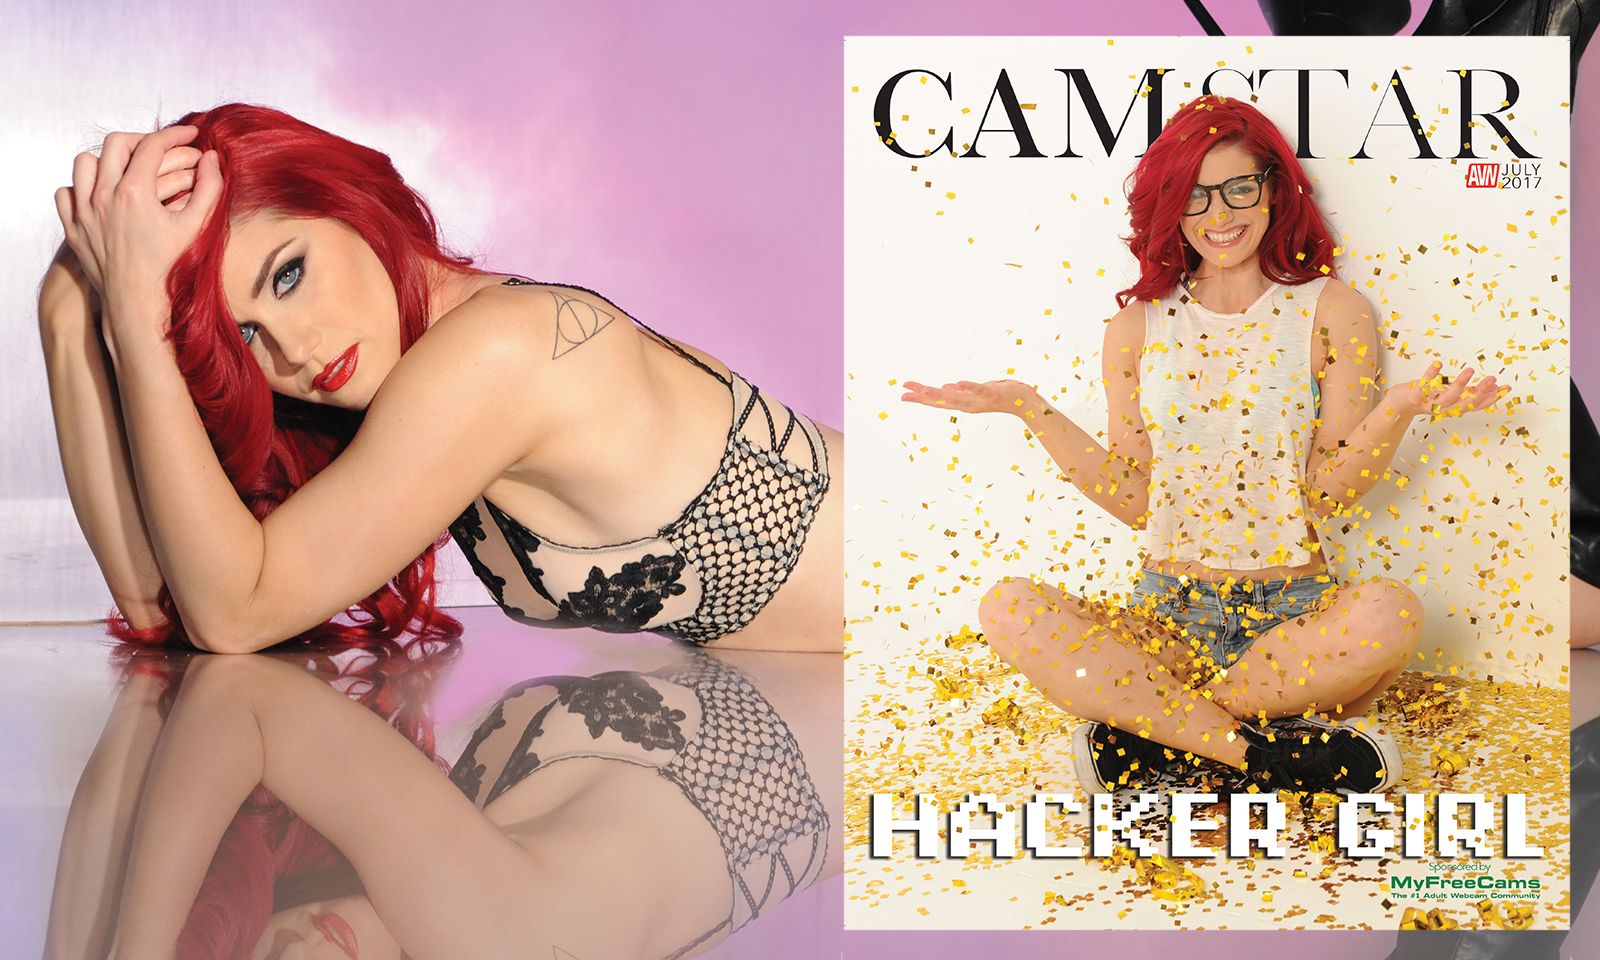 'HackerGirl' Opens Up in July CAMStar Magazine